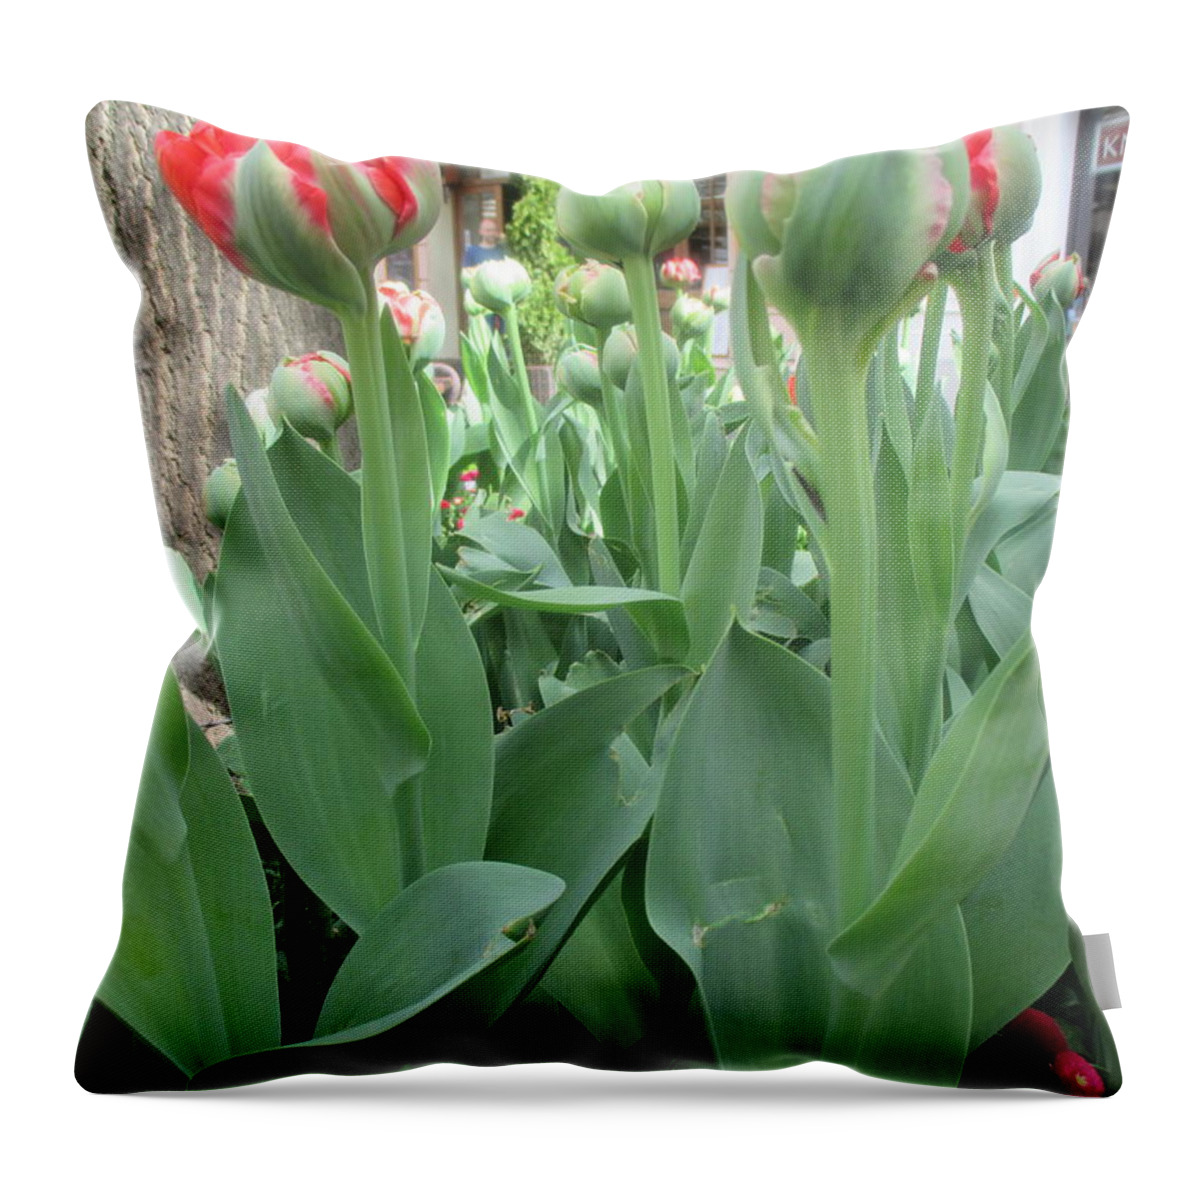 Flowers Throw Pillow featuring the photograph Flowers Appearing In The Park by Anamarija Marinovic